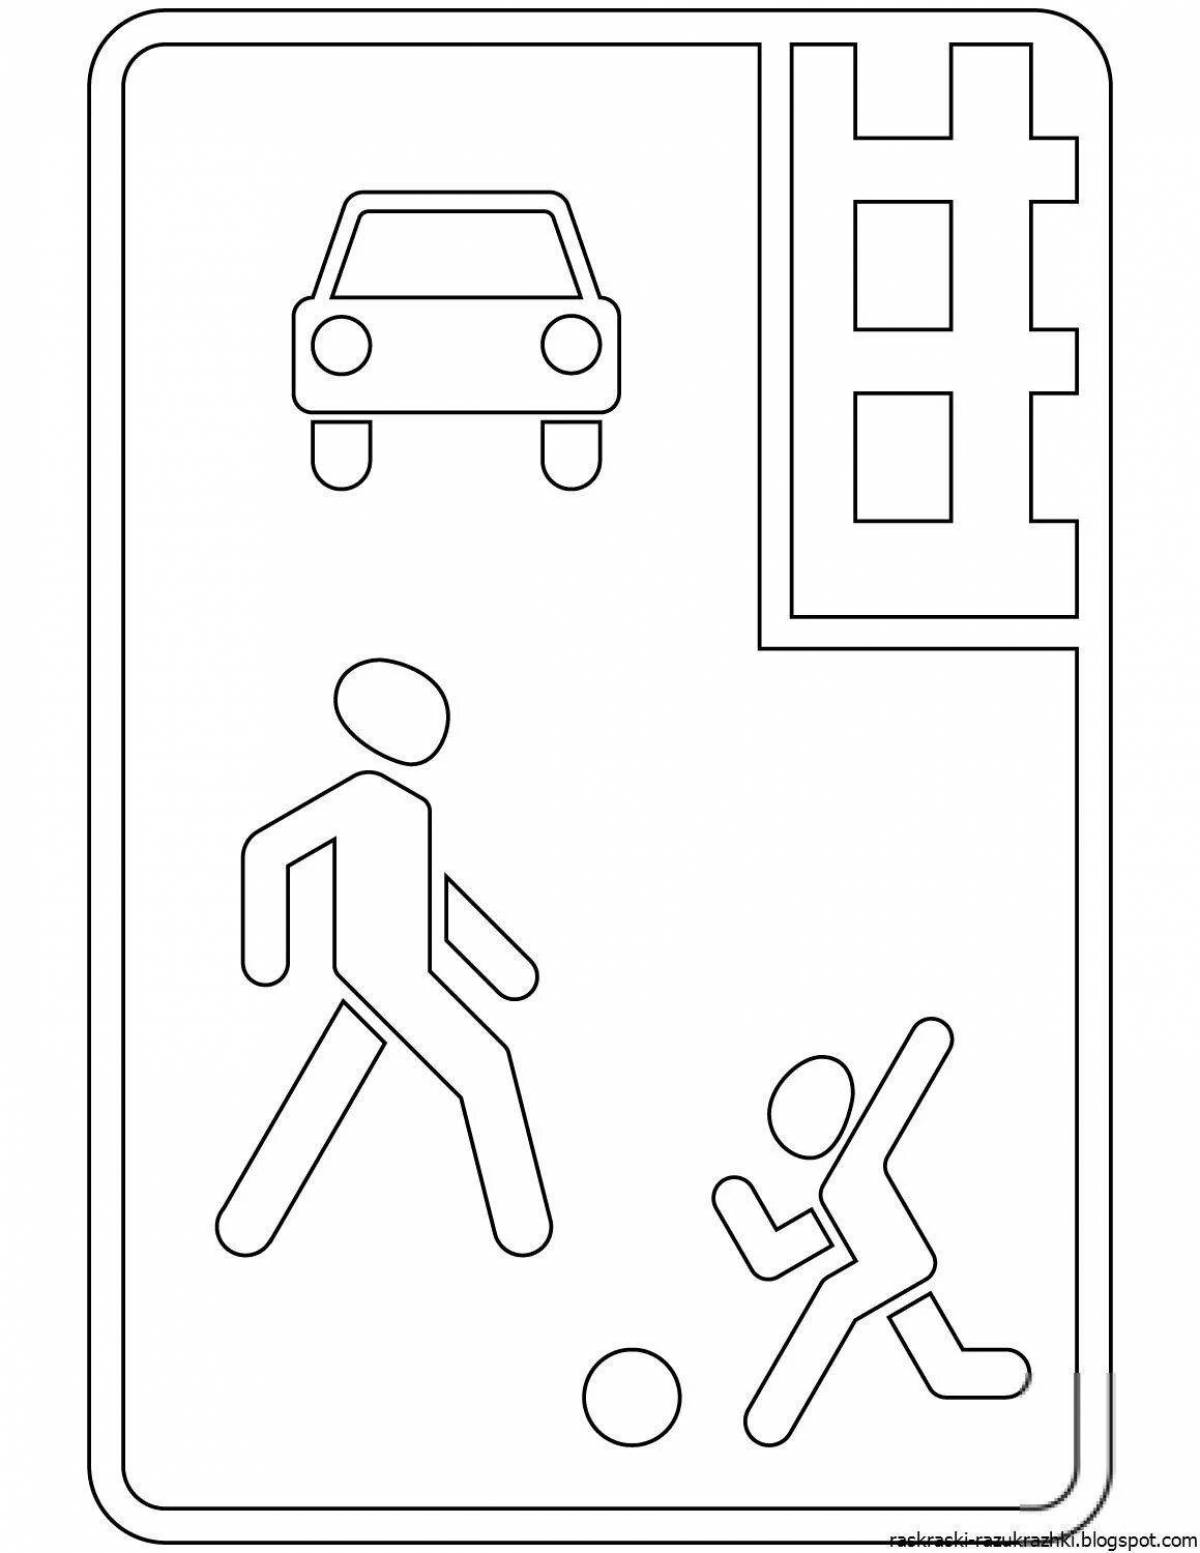 Coloring page busy pedestrian signs